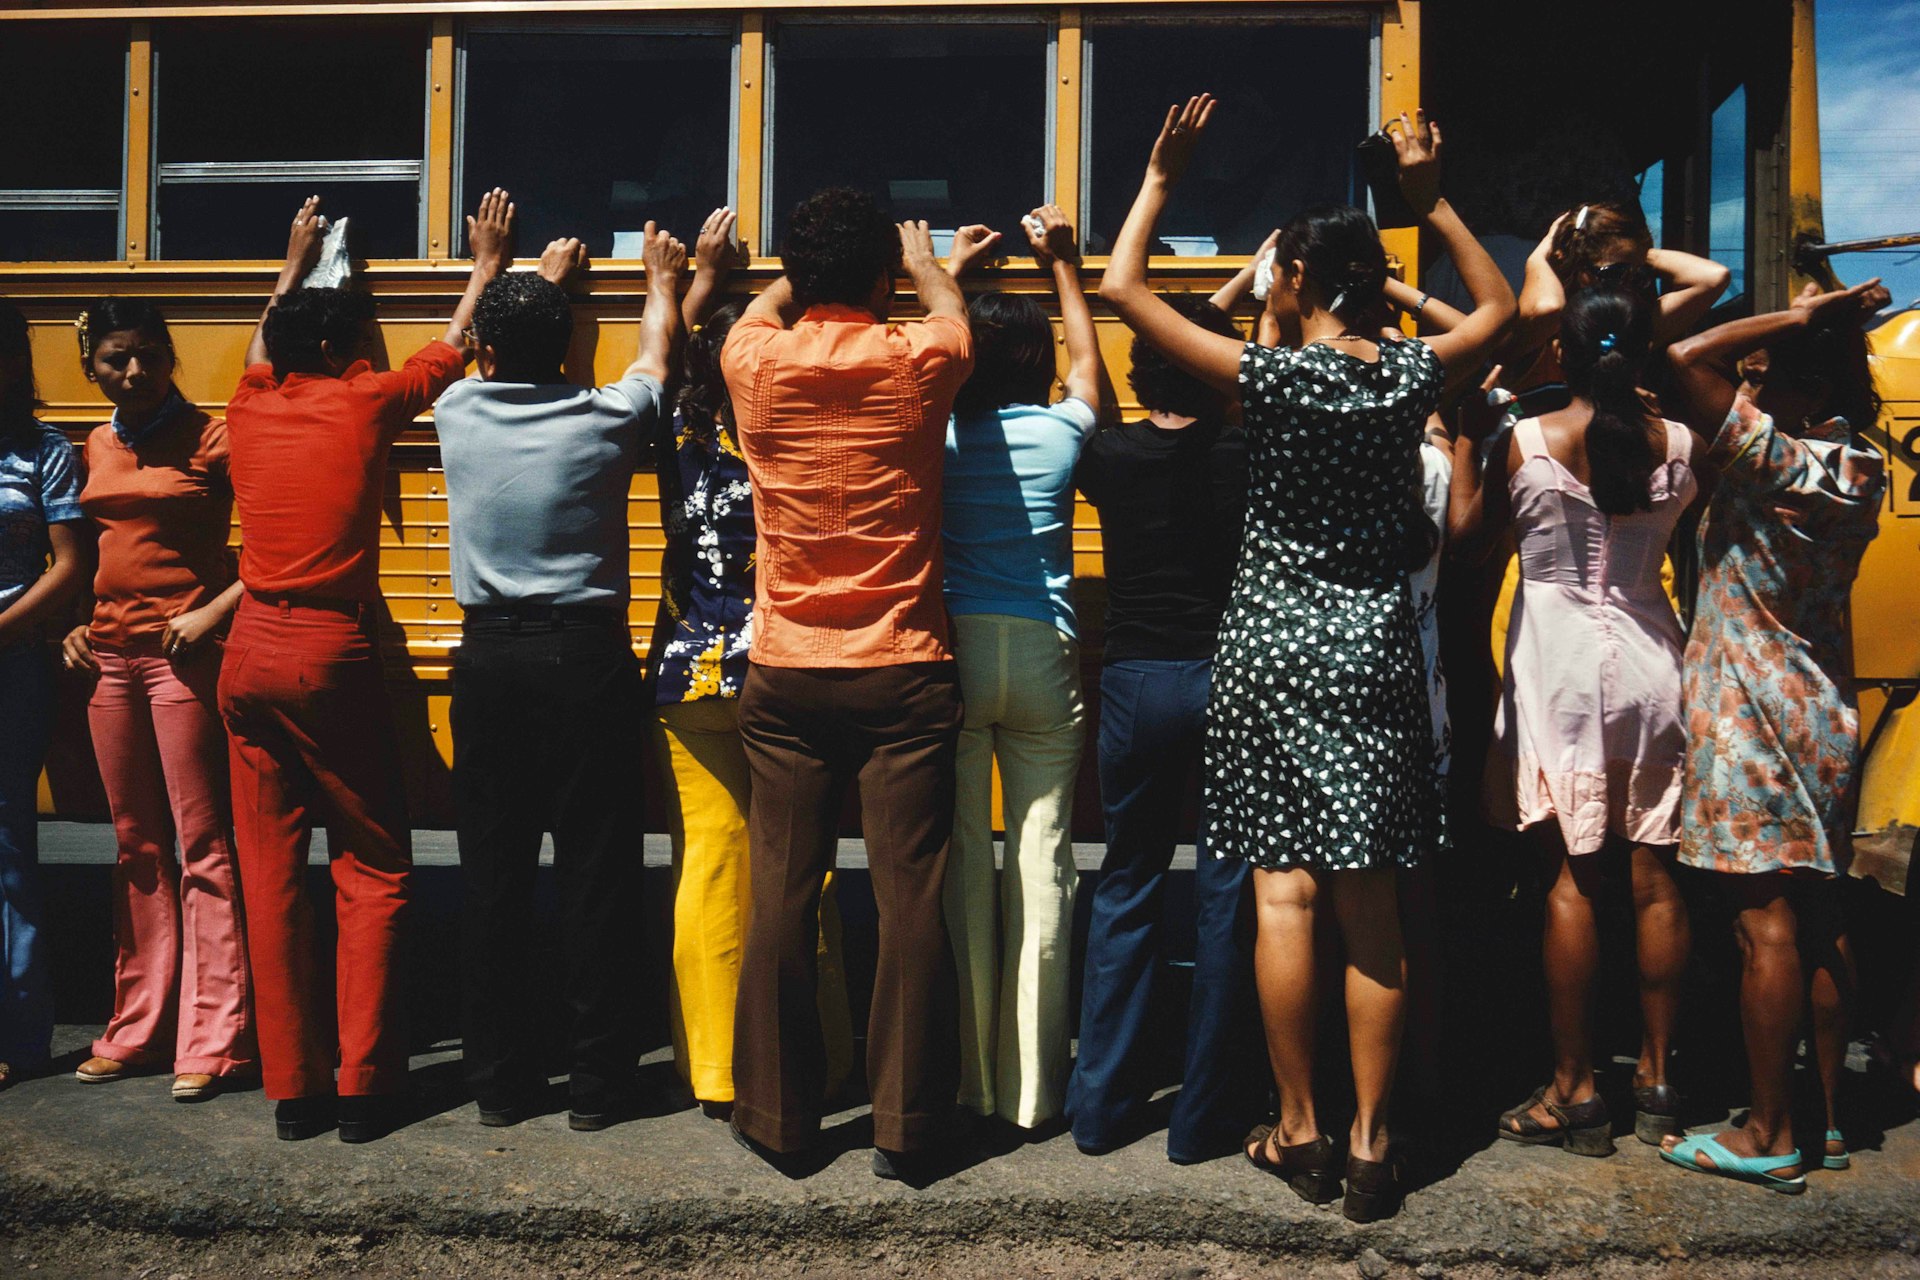 Everyone traveling by car, truck, bus or foot is searched, Ciudad Sandino, Nicaragua 1978